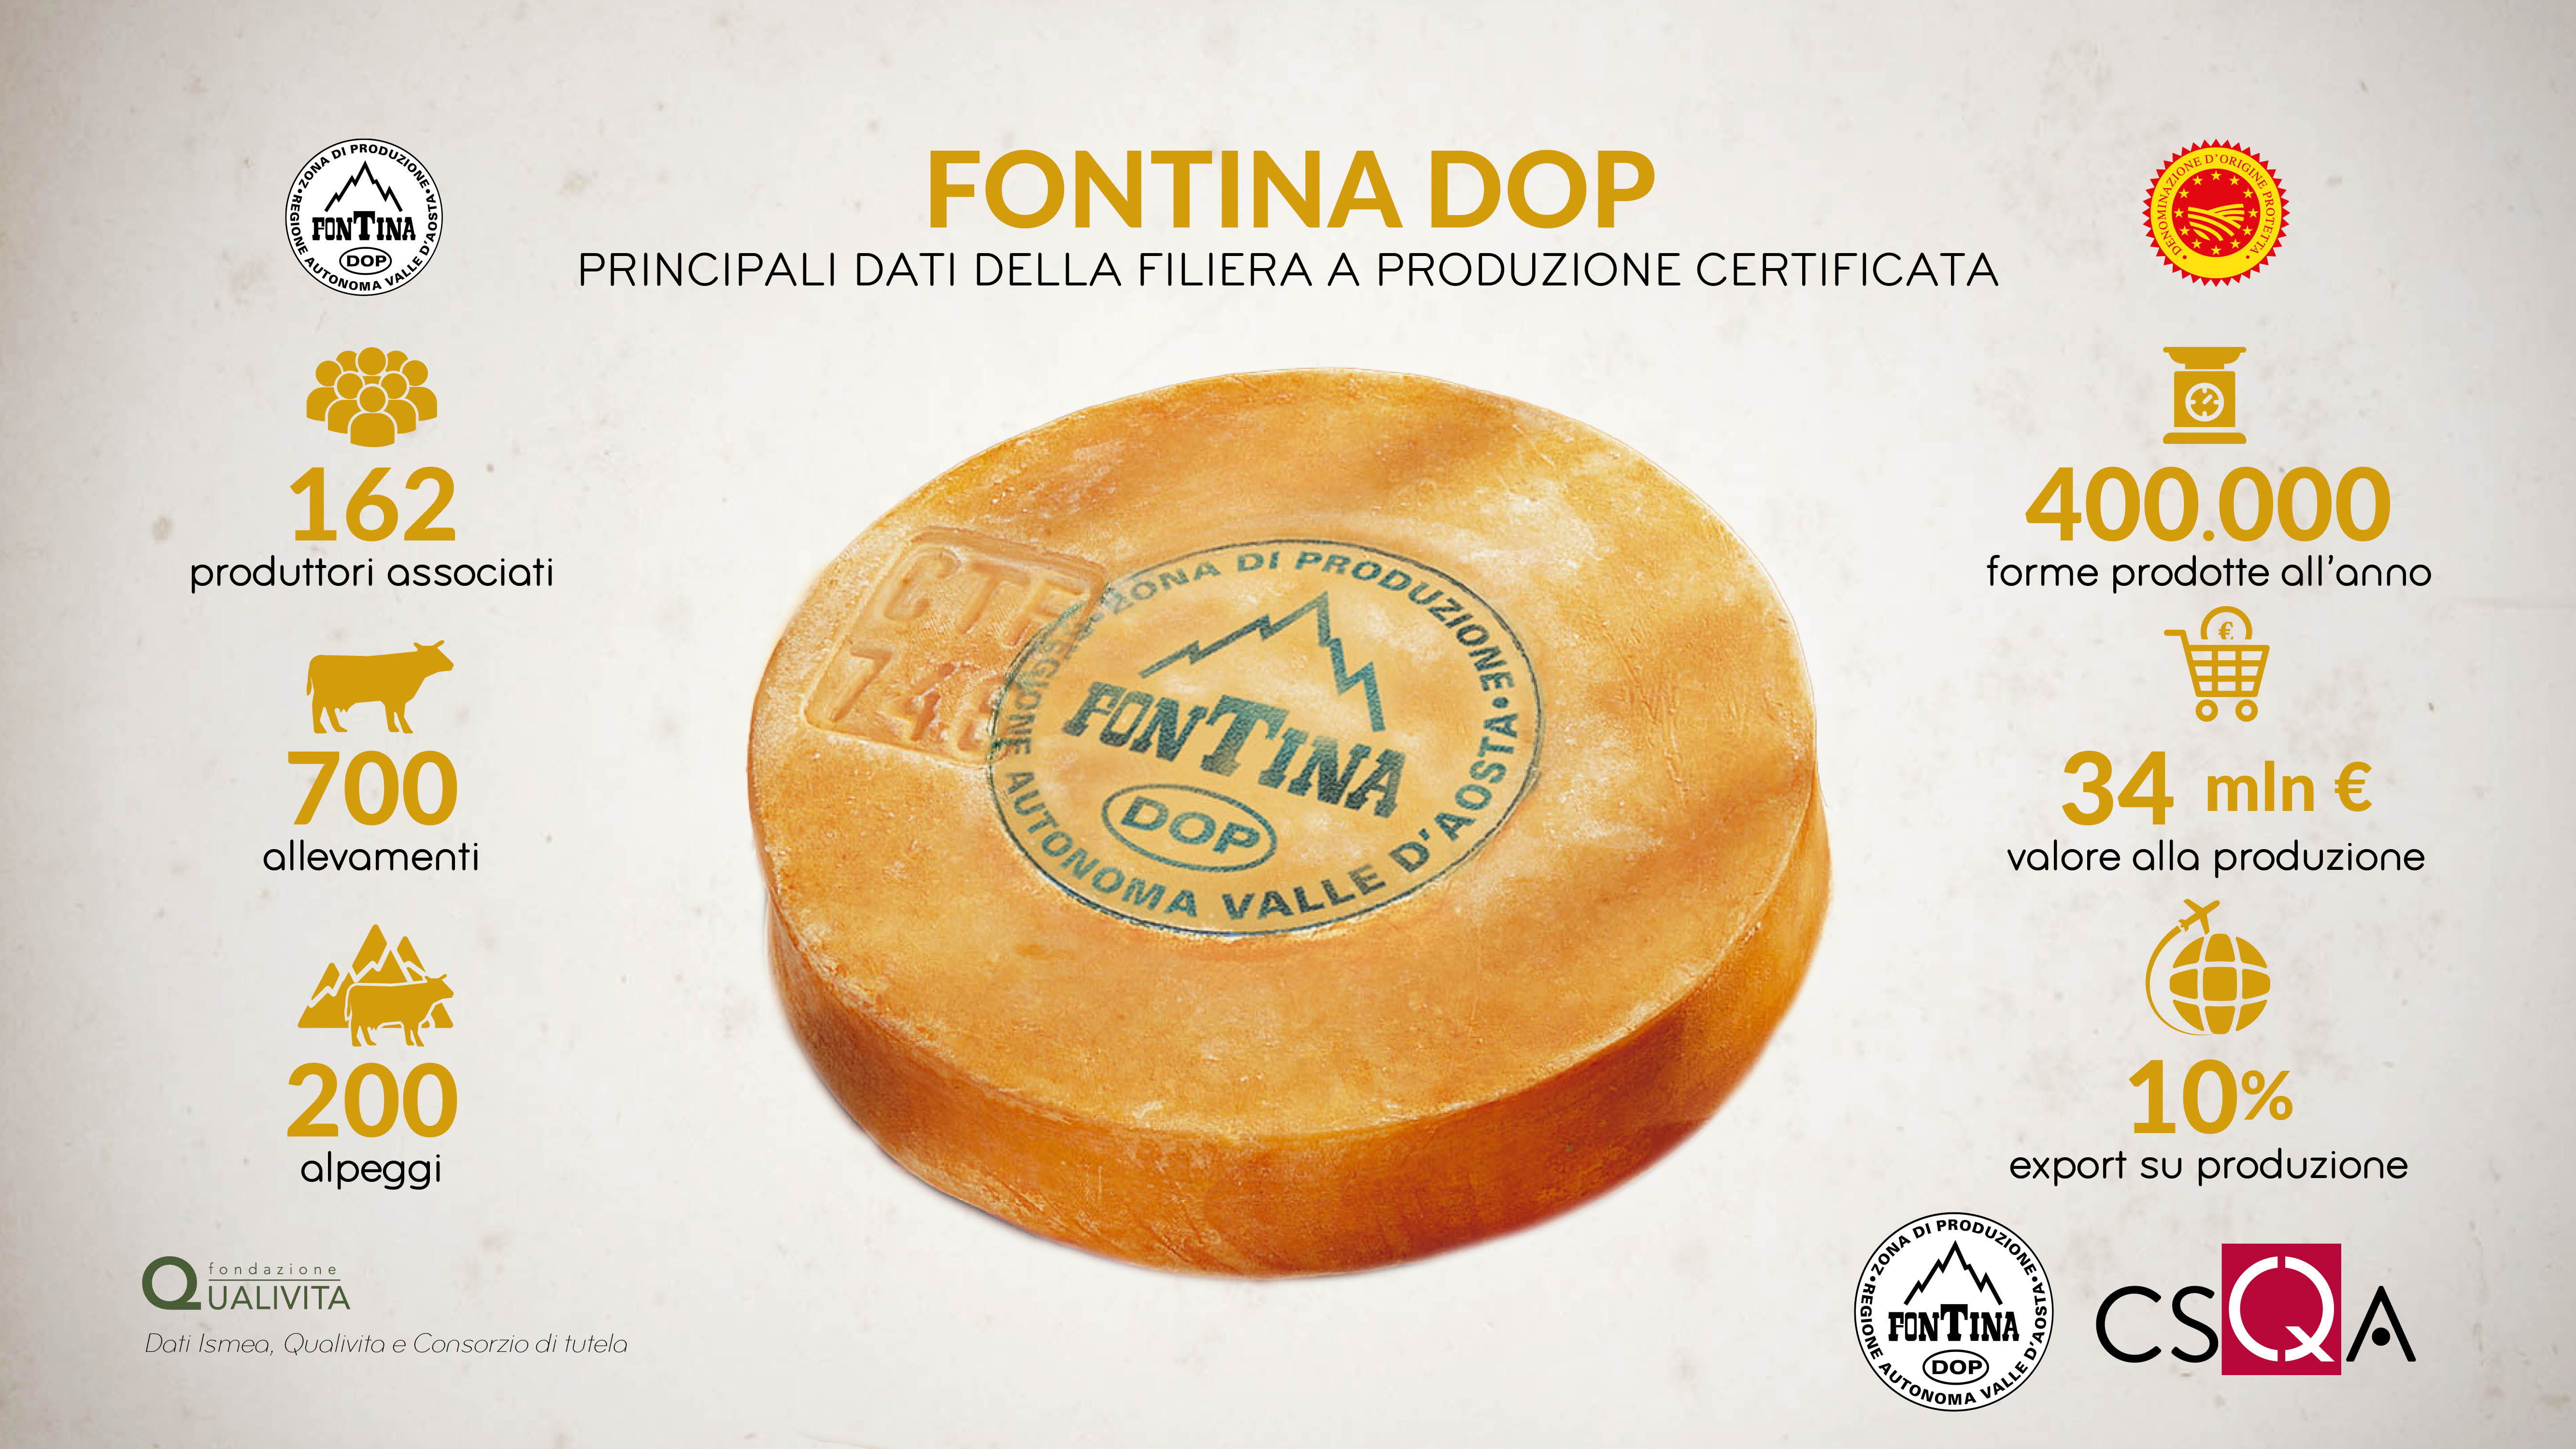 Fontina PDO, new control plan to relaunch the certified supply chain